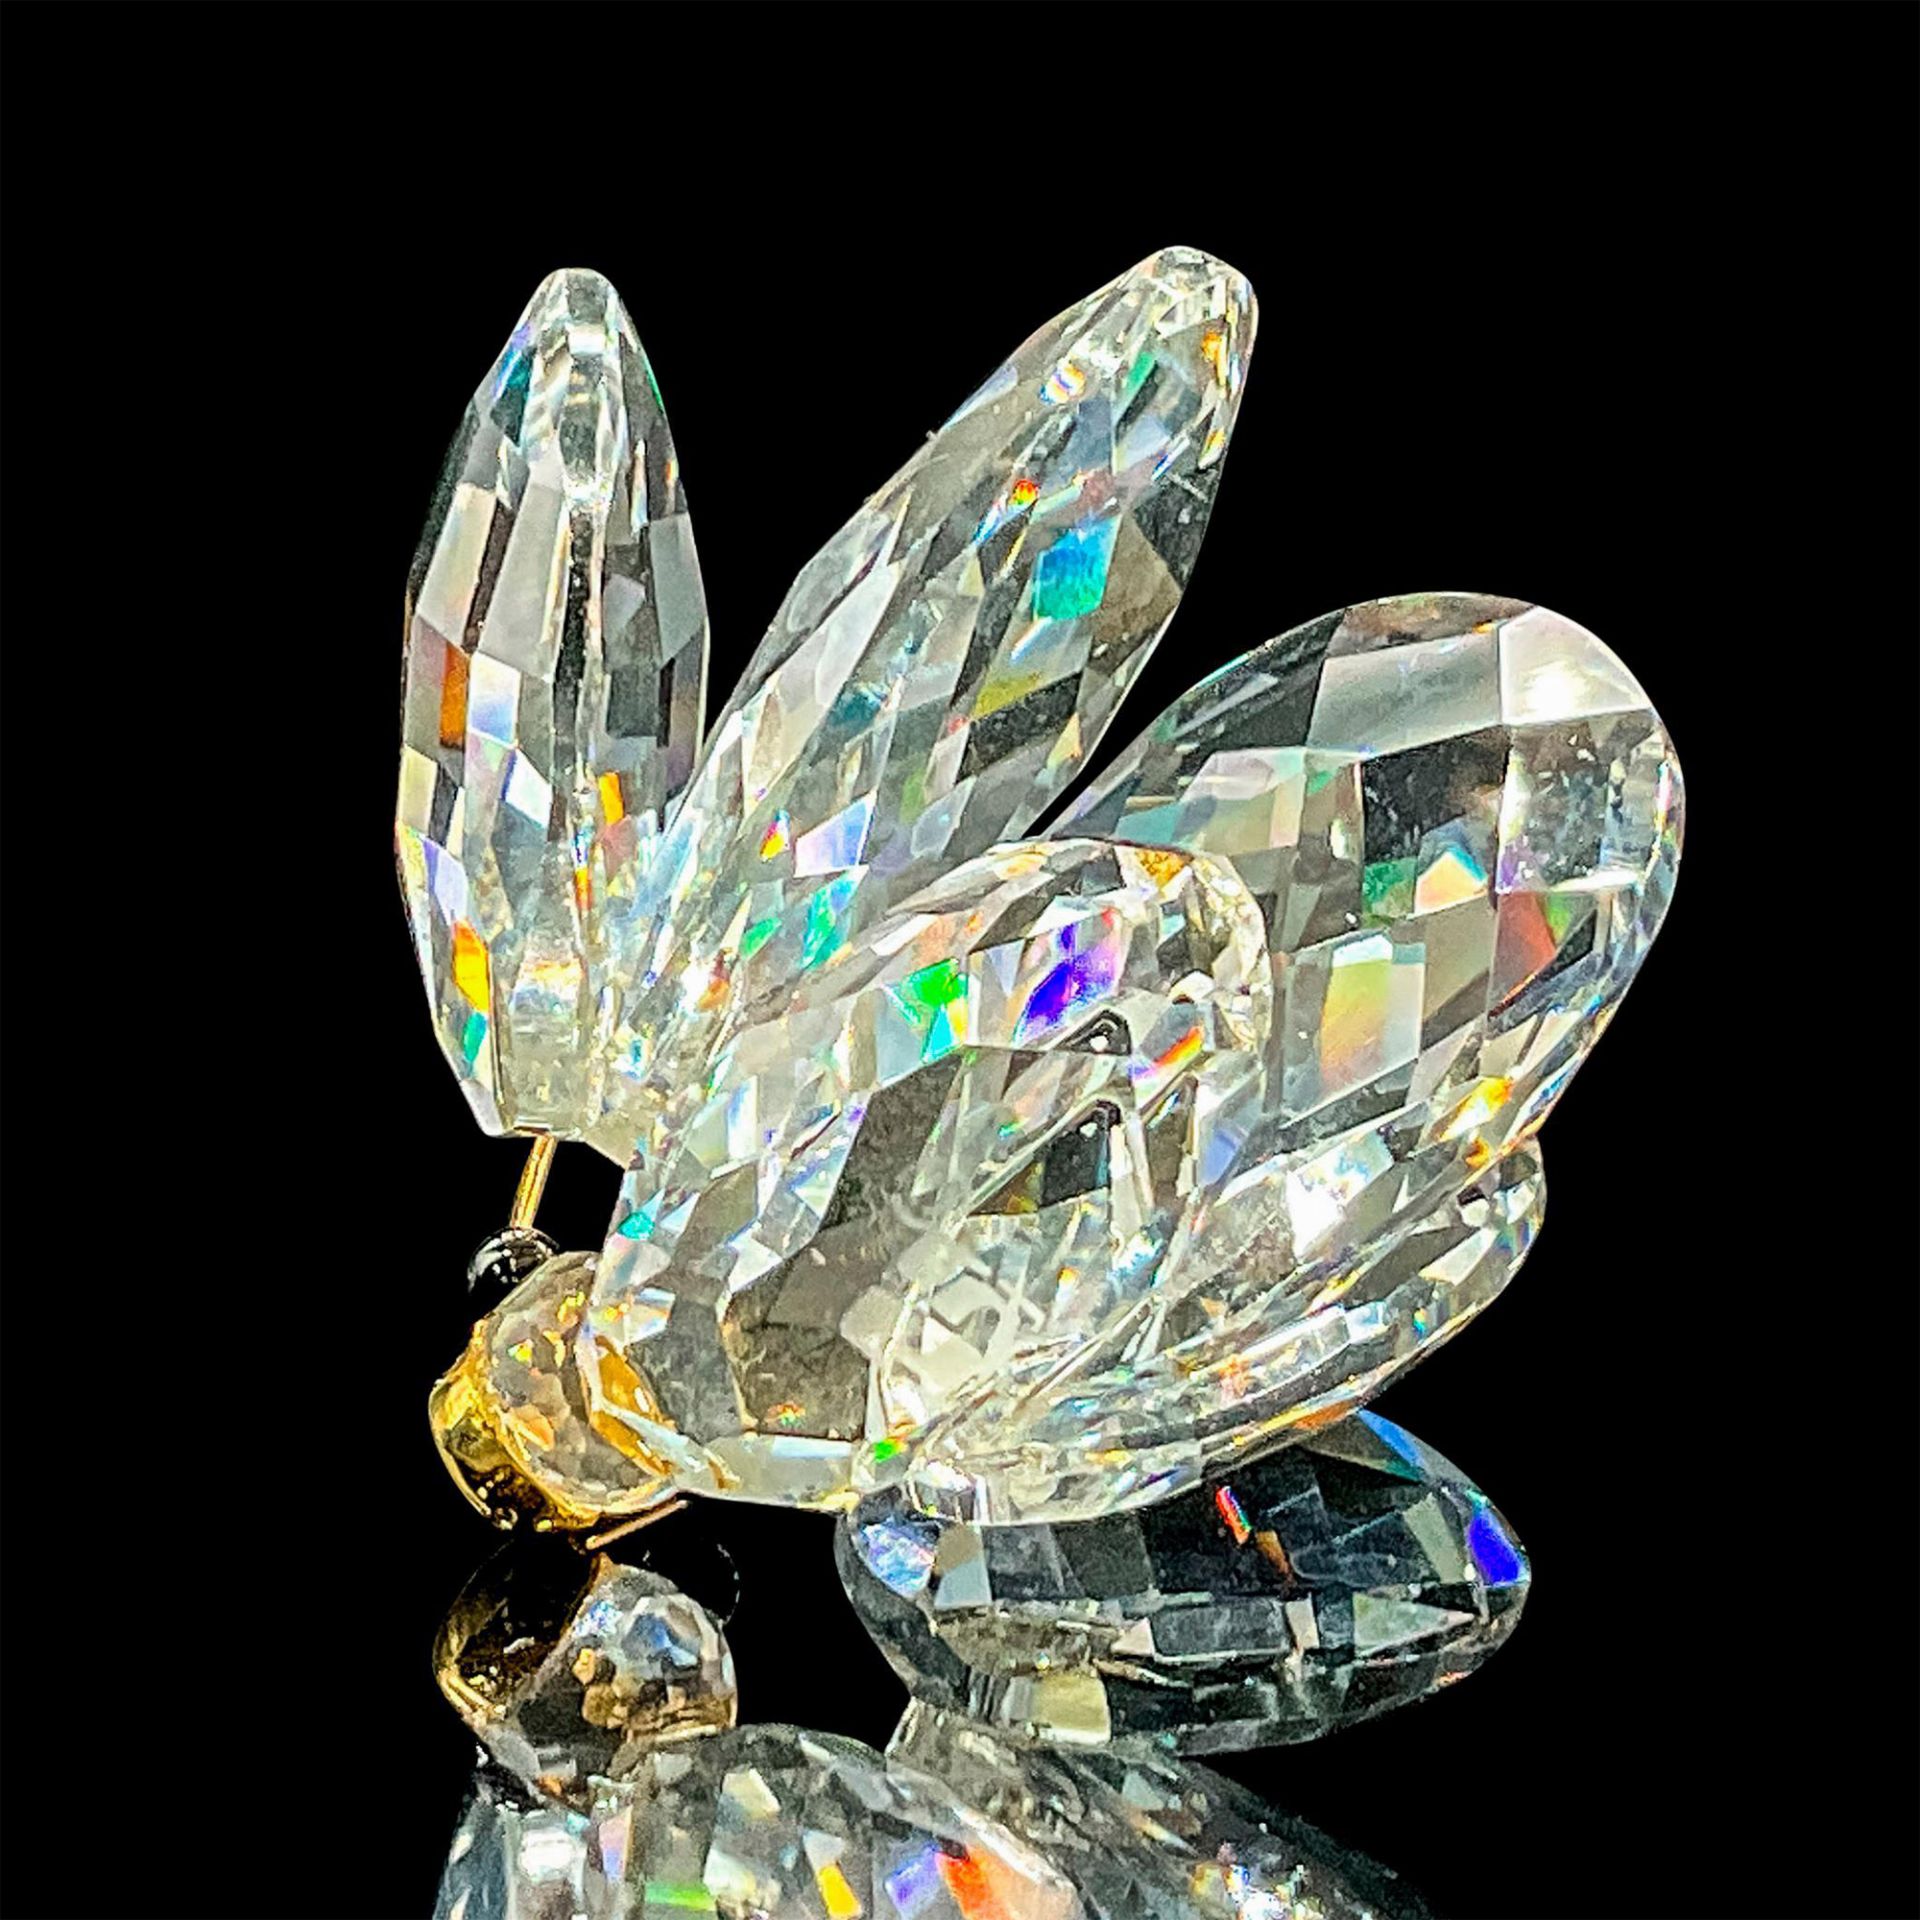 Swarovski Crystal Figurine, Butterfly with Gold Antennae - Image 4 of 5